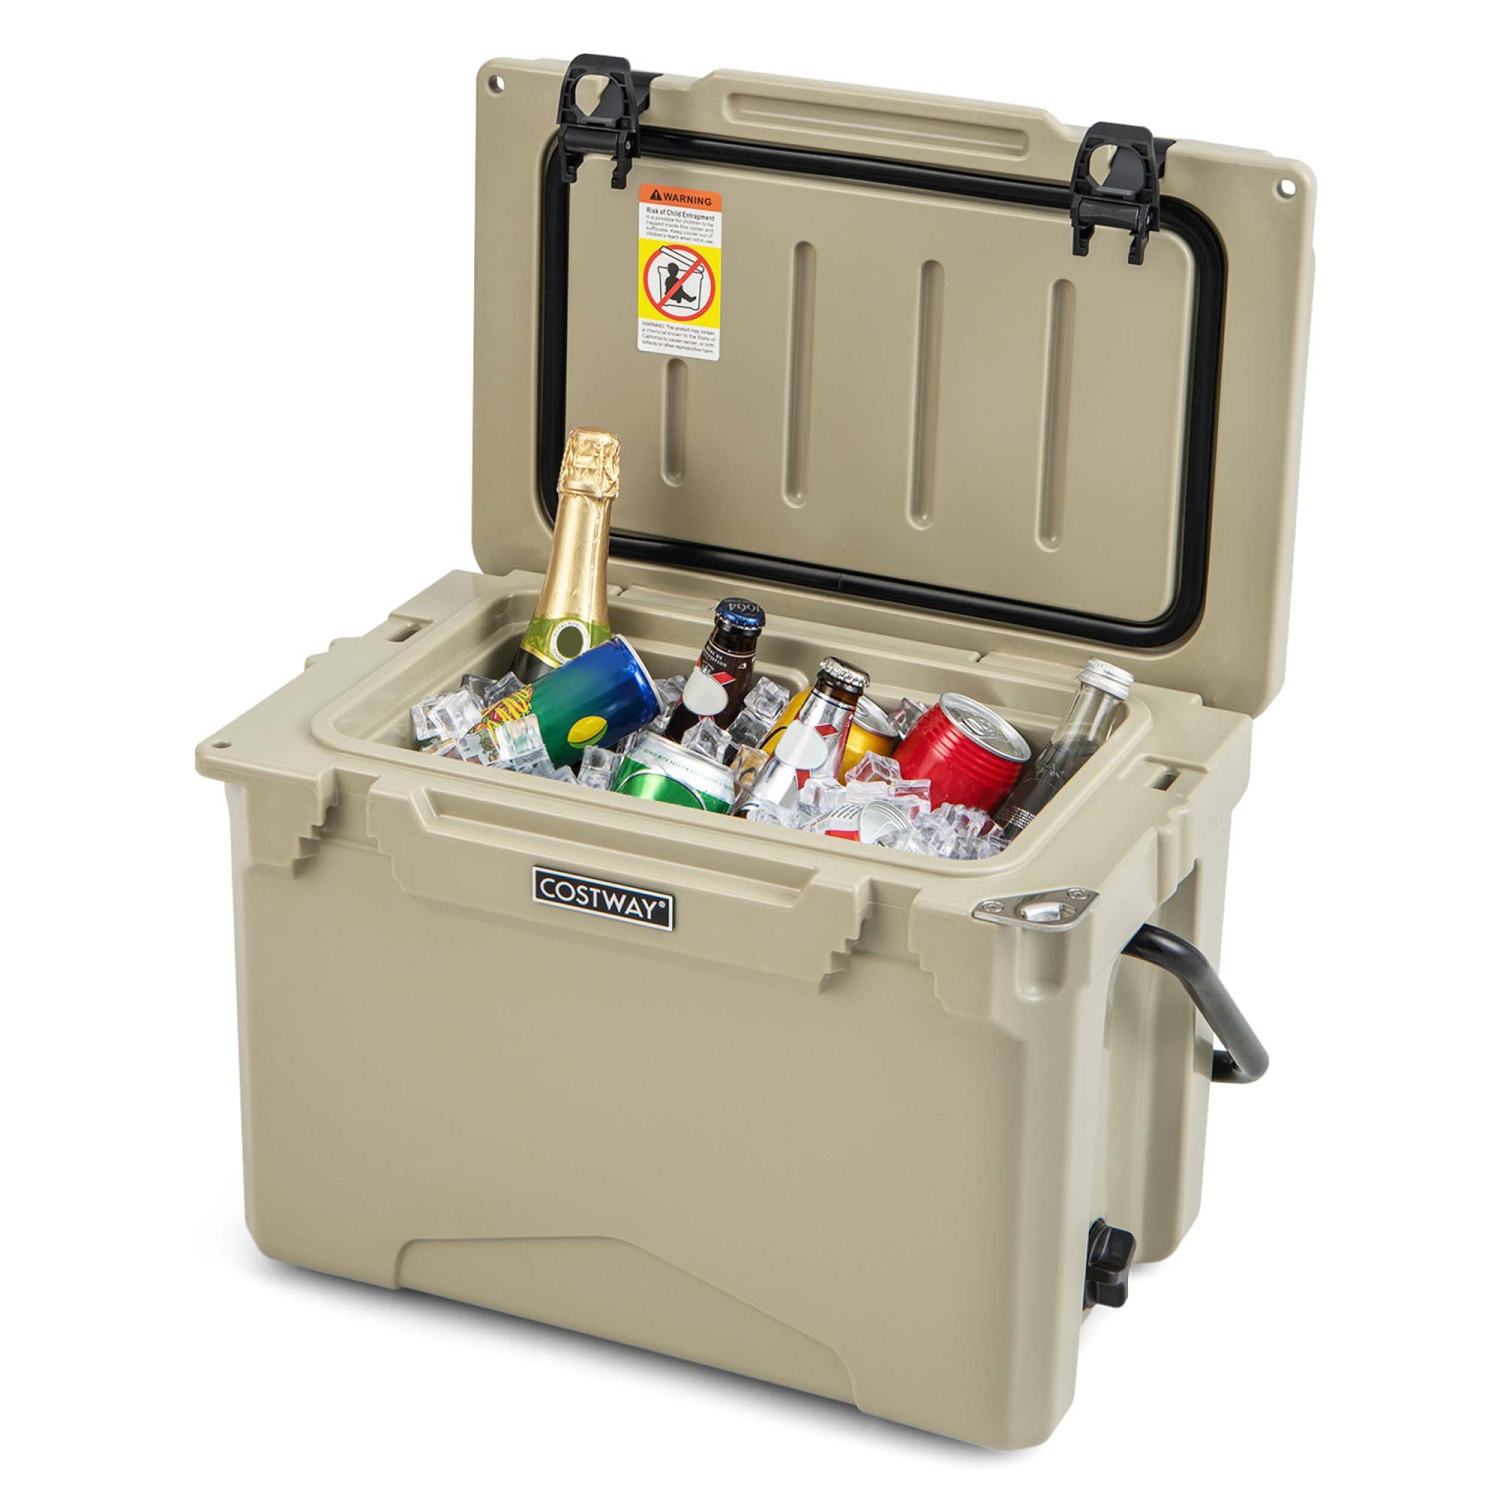 Costway 25 QT Portable Cooler Rotomolded Ice Chest Insulated Ice Box for 5-7 Days